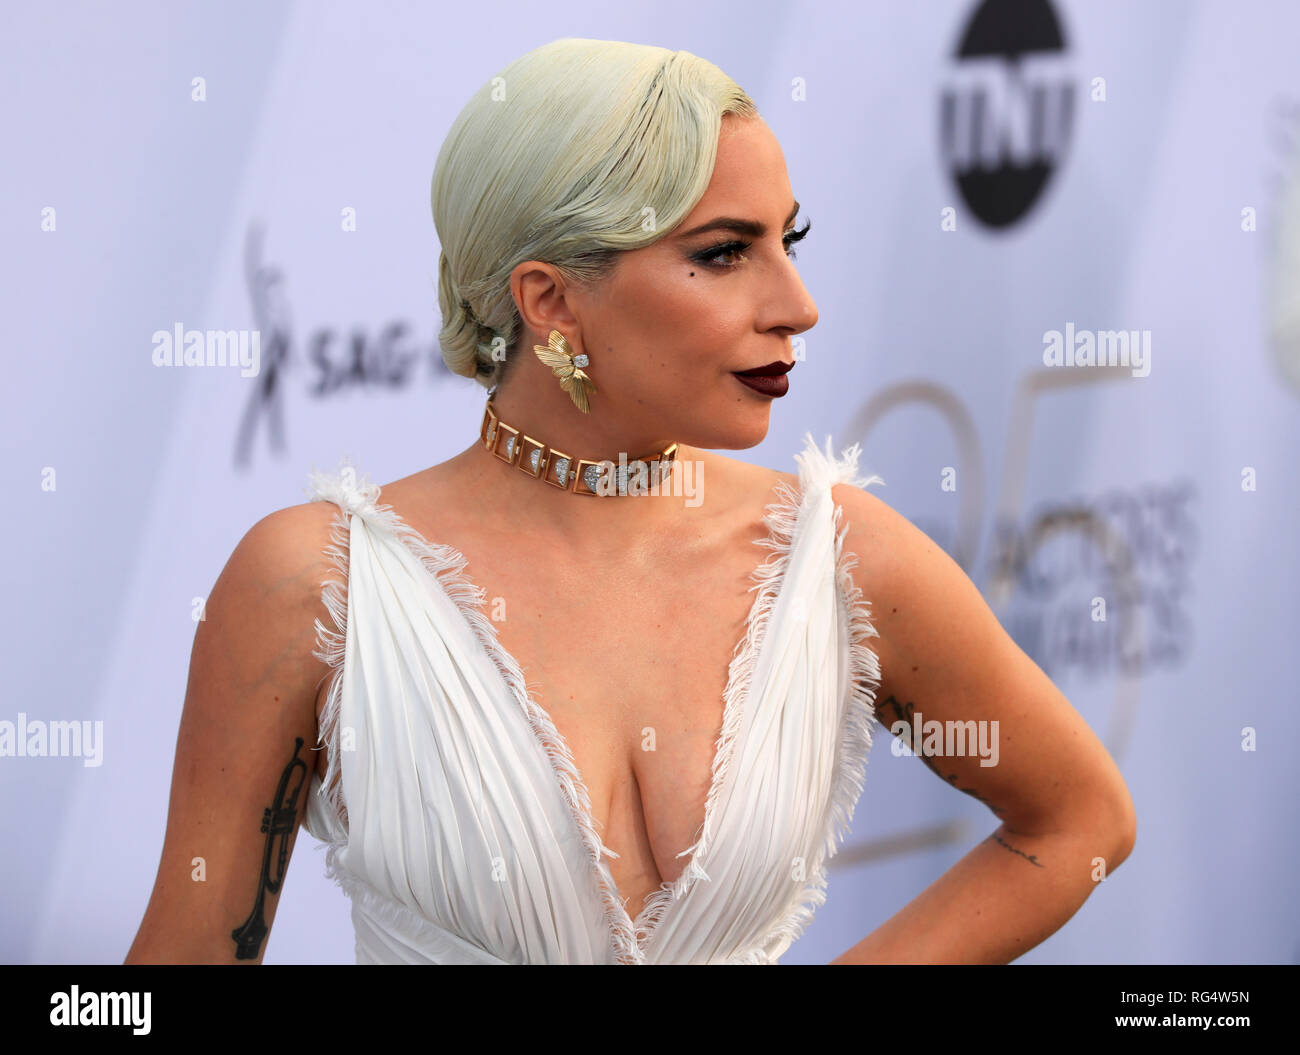 Los Angeles, USA. 27th Jan, 2019. Actress Lady Gaga arrives for the 25th Annual Screen Actors Guild Awards at the Shrine Auditorium in Los Angeles, the United States on Jan. 27, 2019. Credit: Li Ying/Xinhua/Alamy Live News Stock Photo